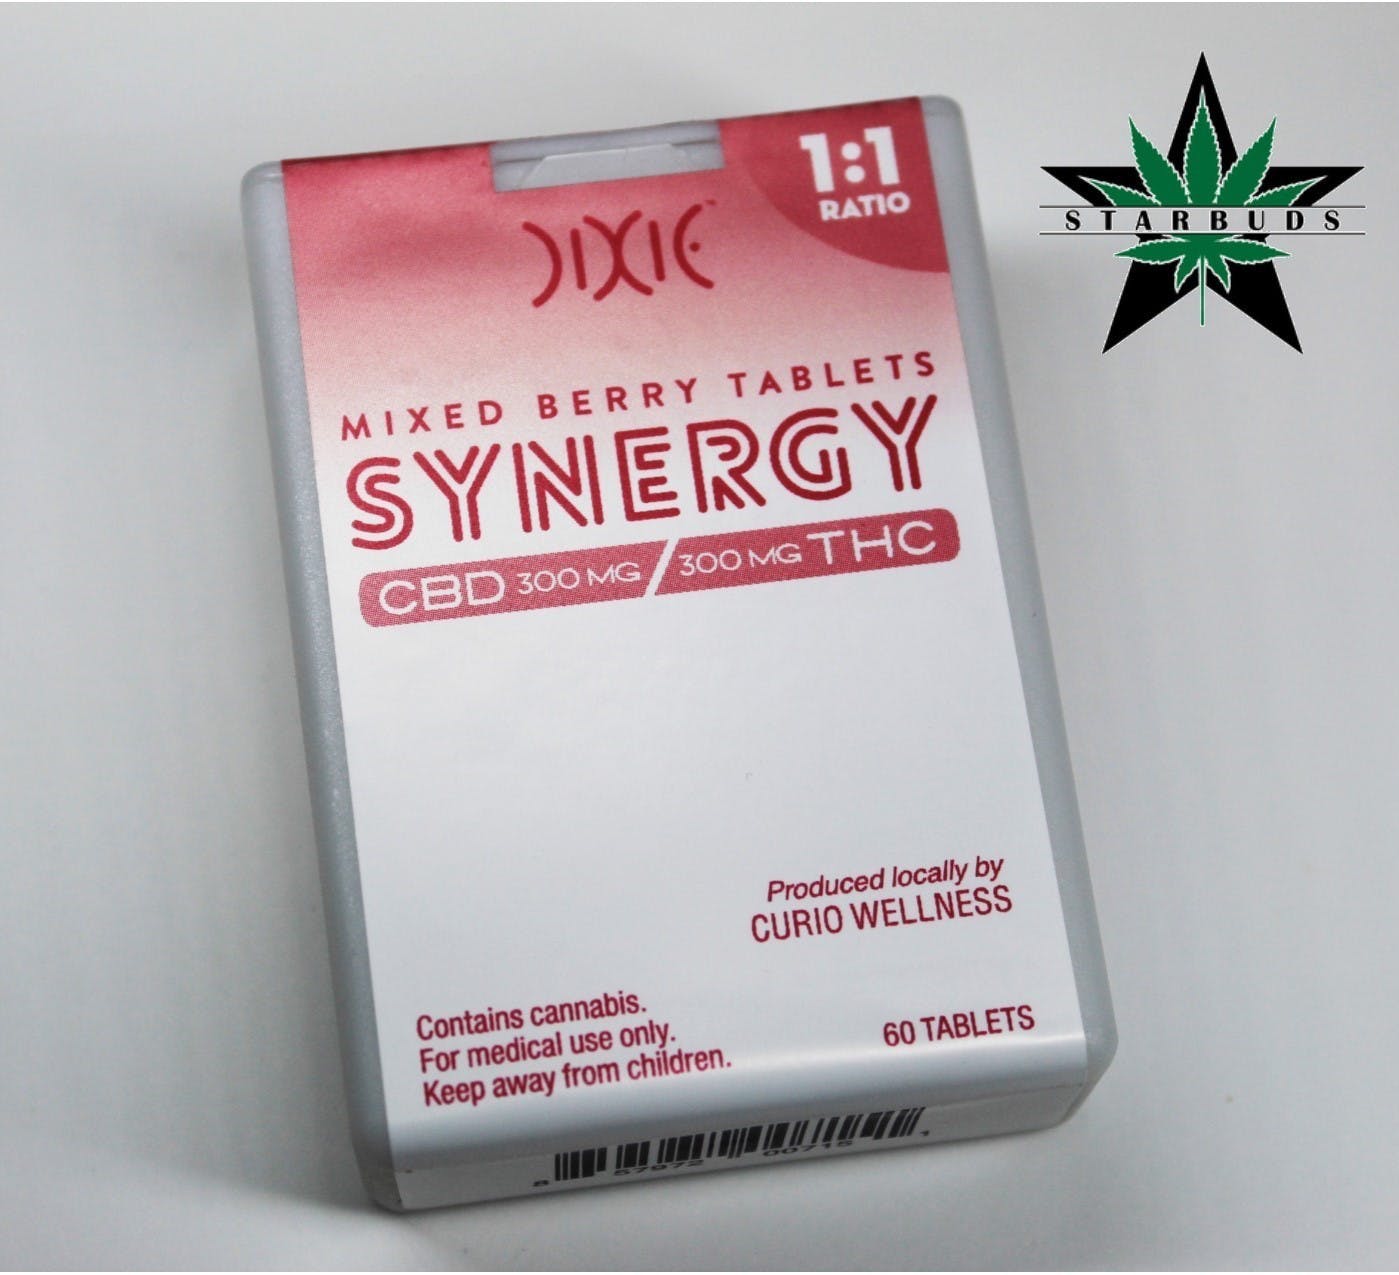 edible-synergy-mixed-berry-tablets-11-300mg